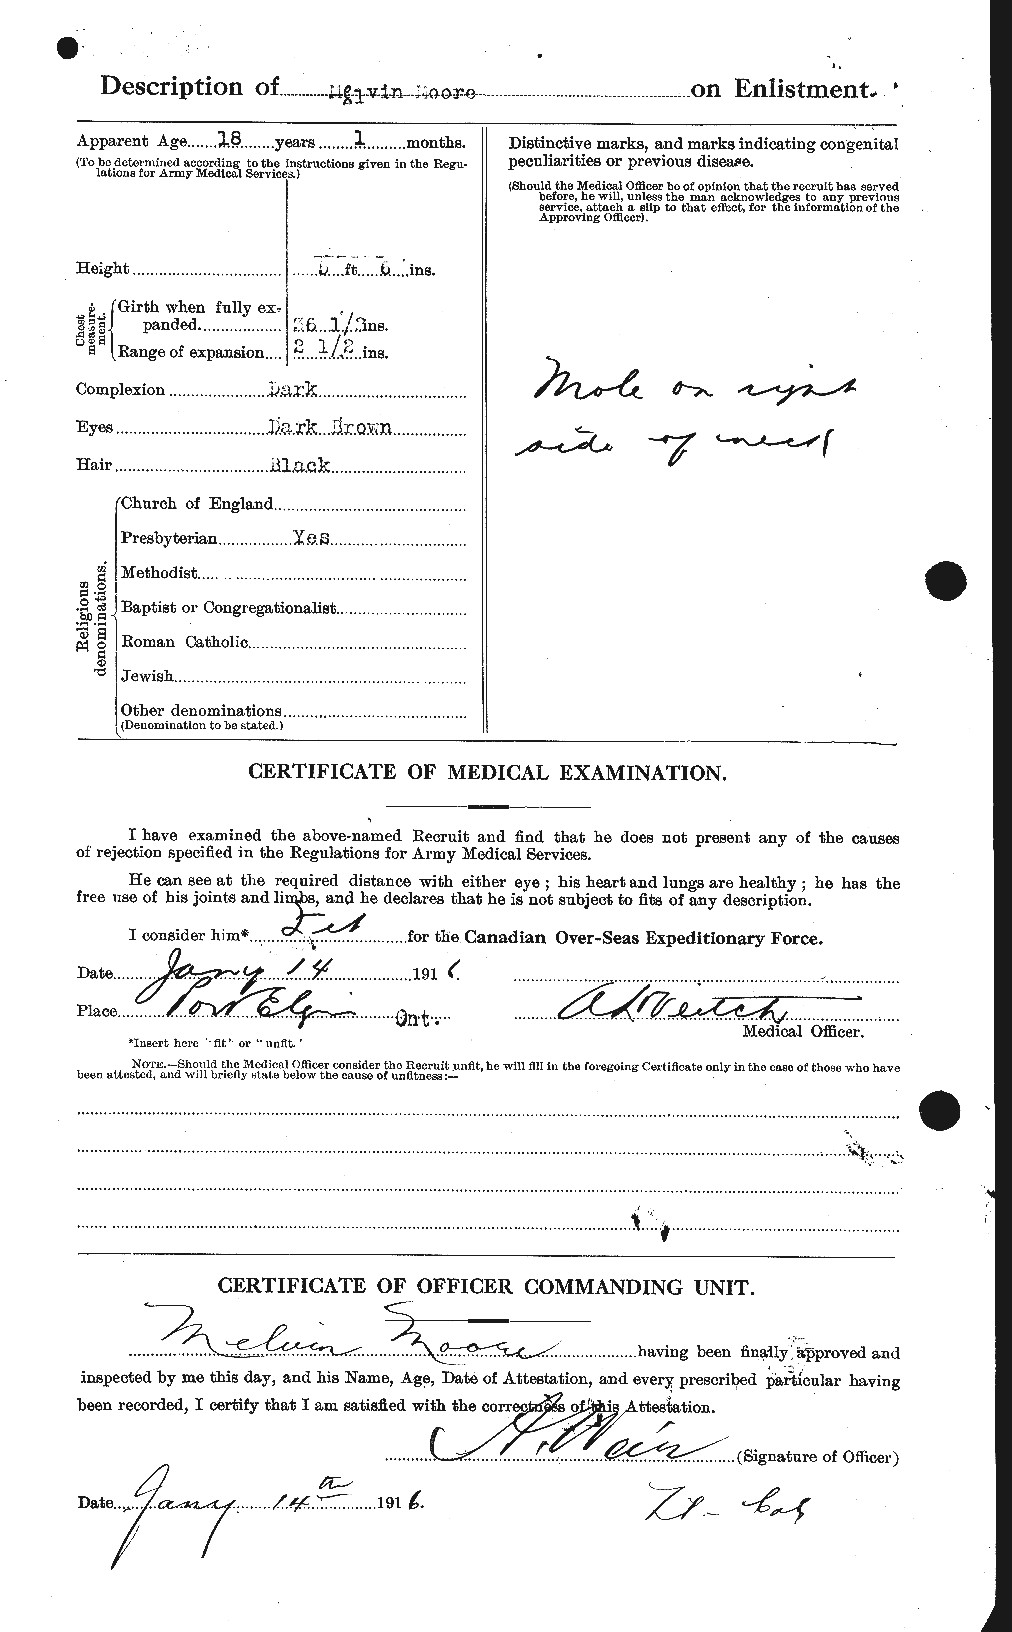 Personnel Records of the First World War - CEF 503438b